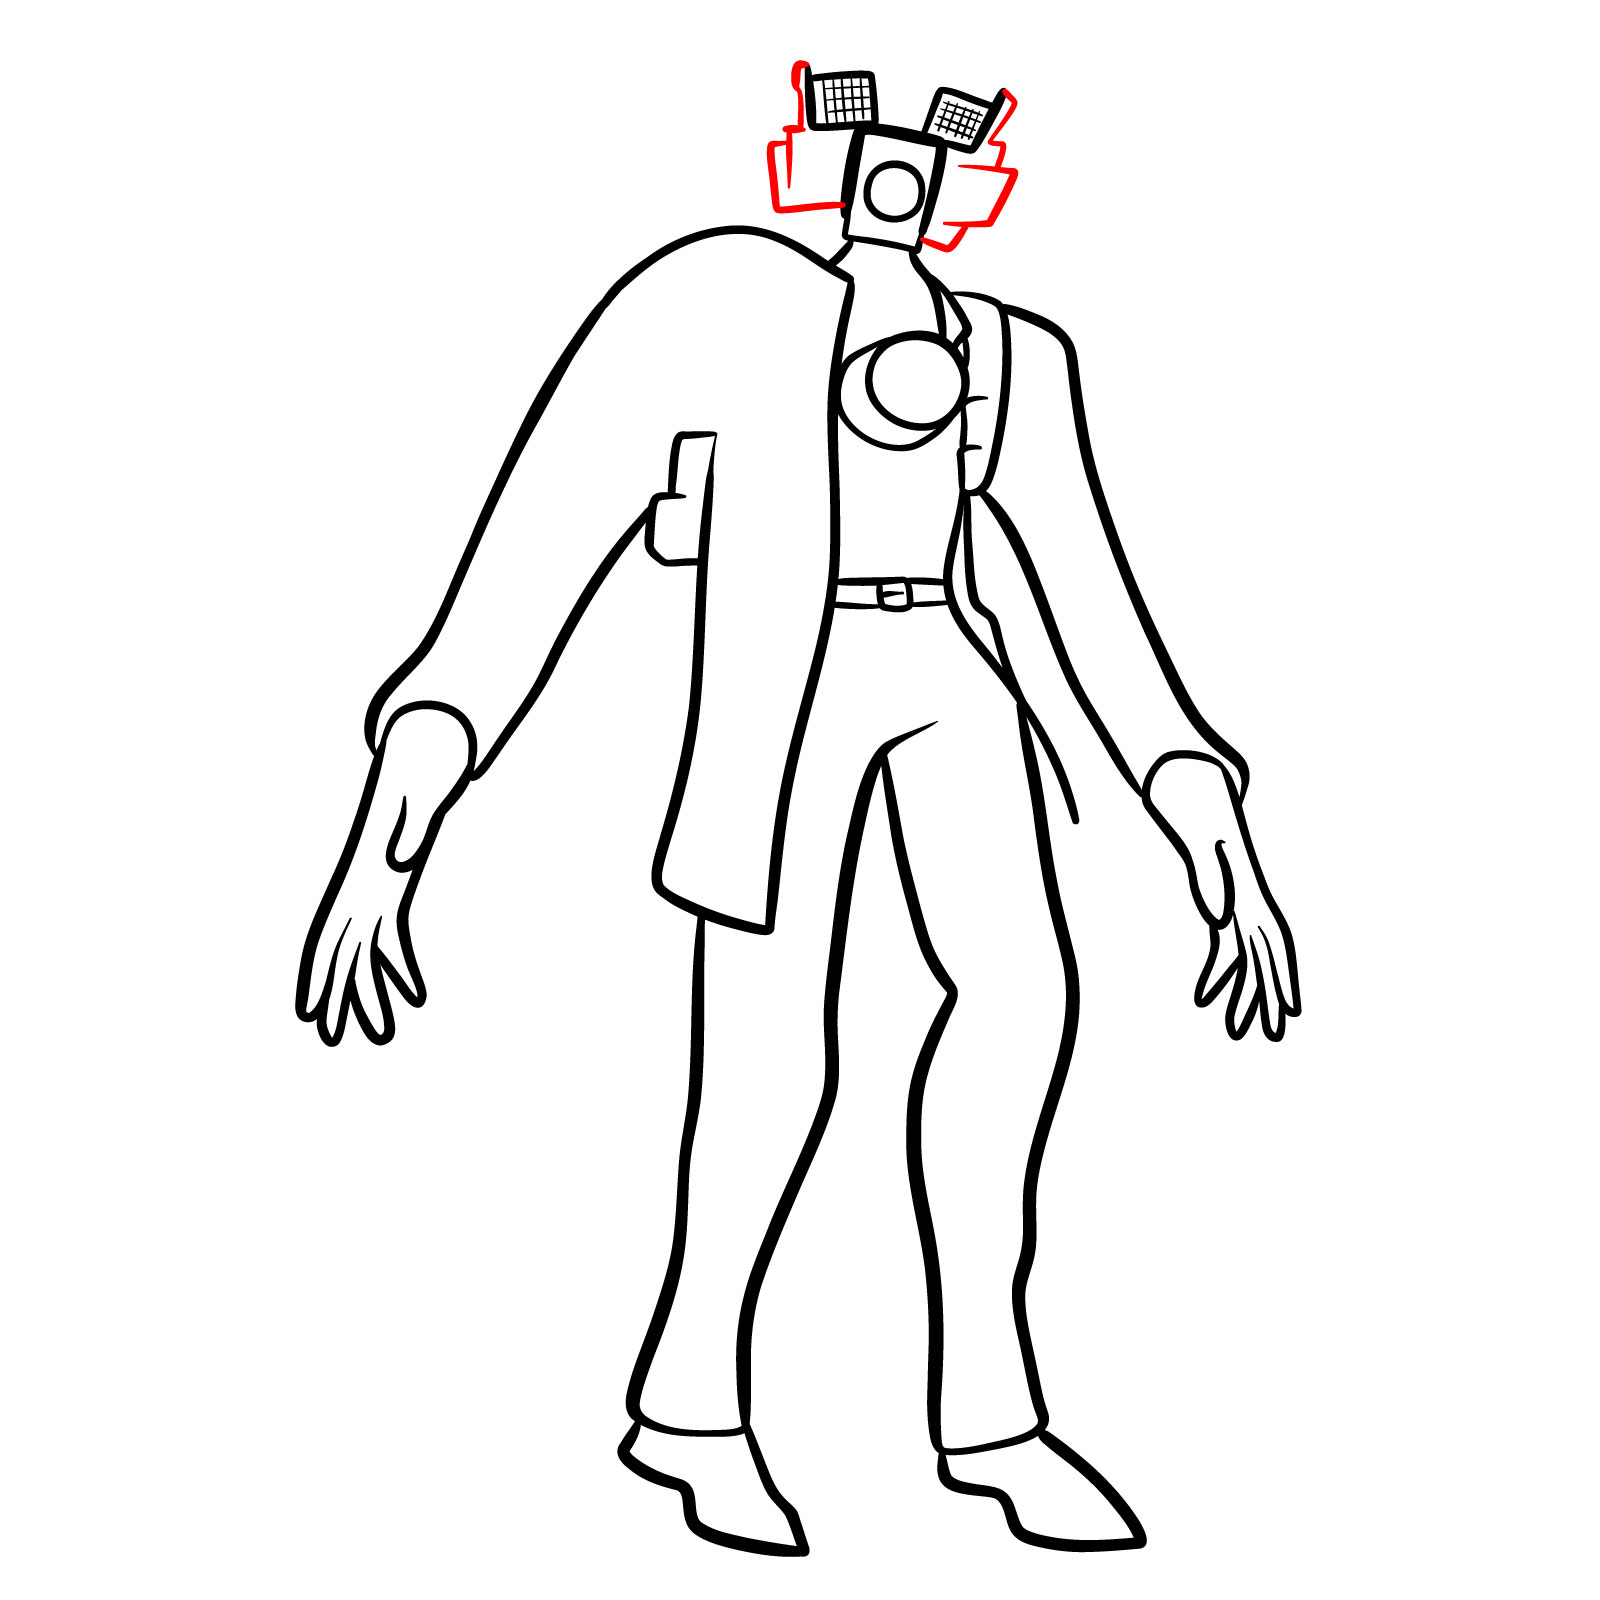 Titan Cameraman's sketch with the head camera elements highlighted in red - step 14